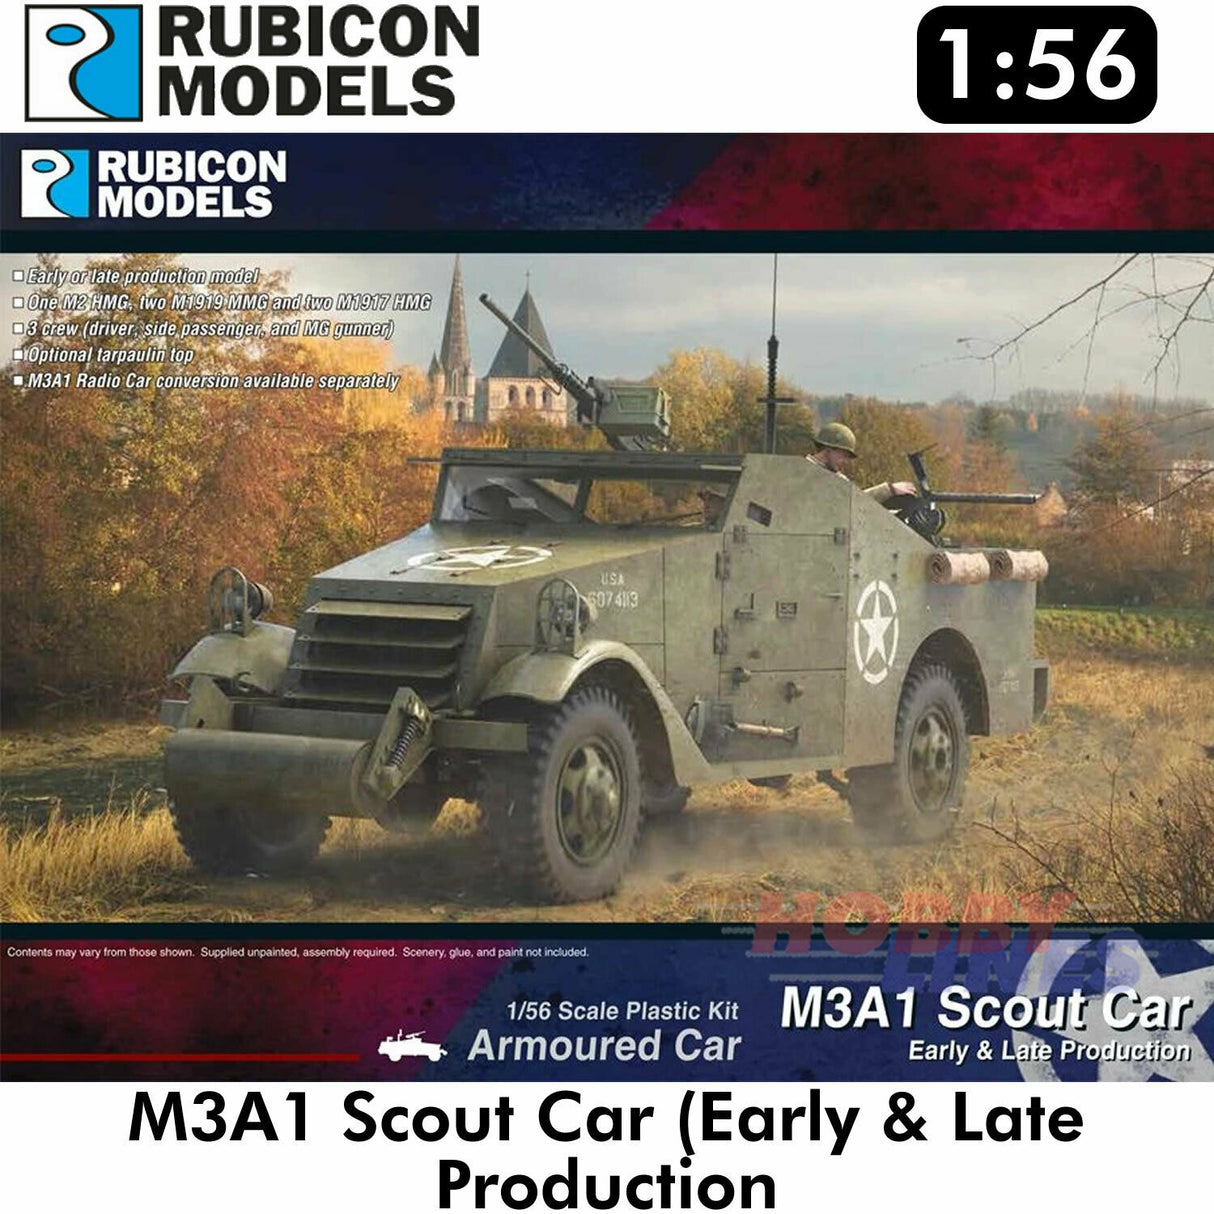 Rubicon 1/56 M3A1 Scout Car Early / Late Production